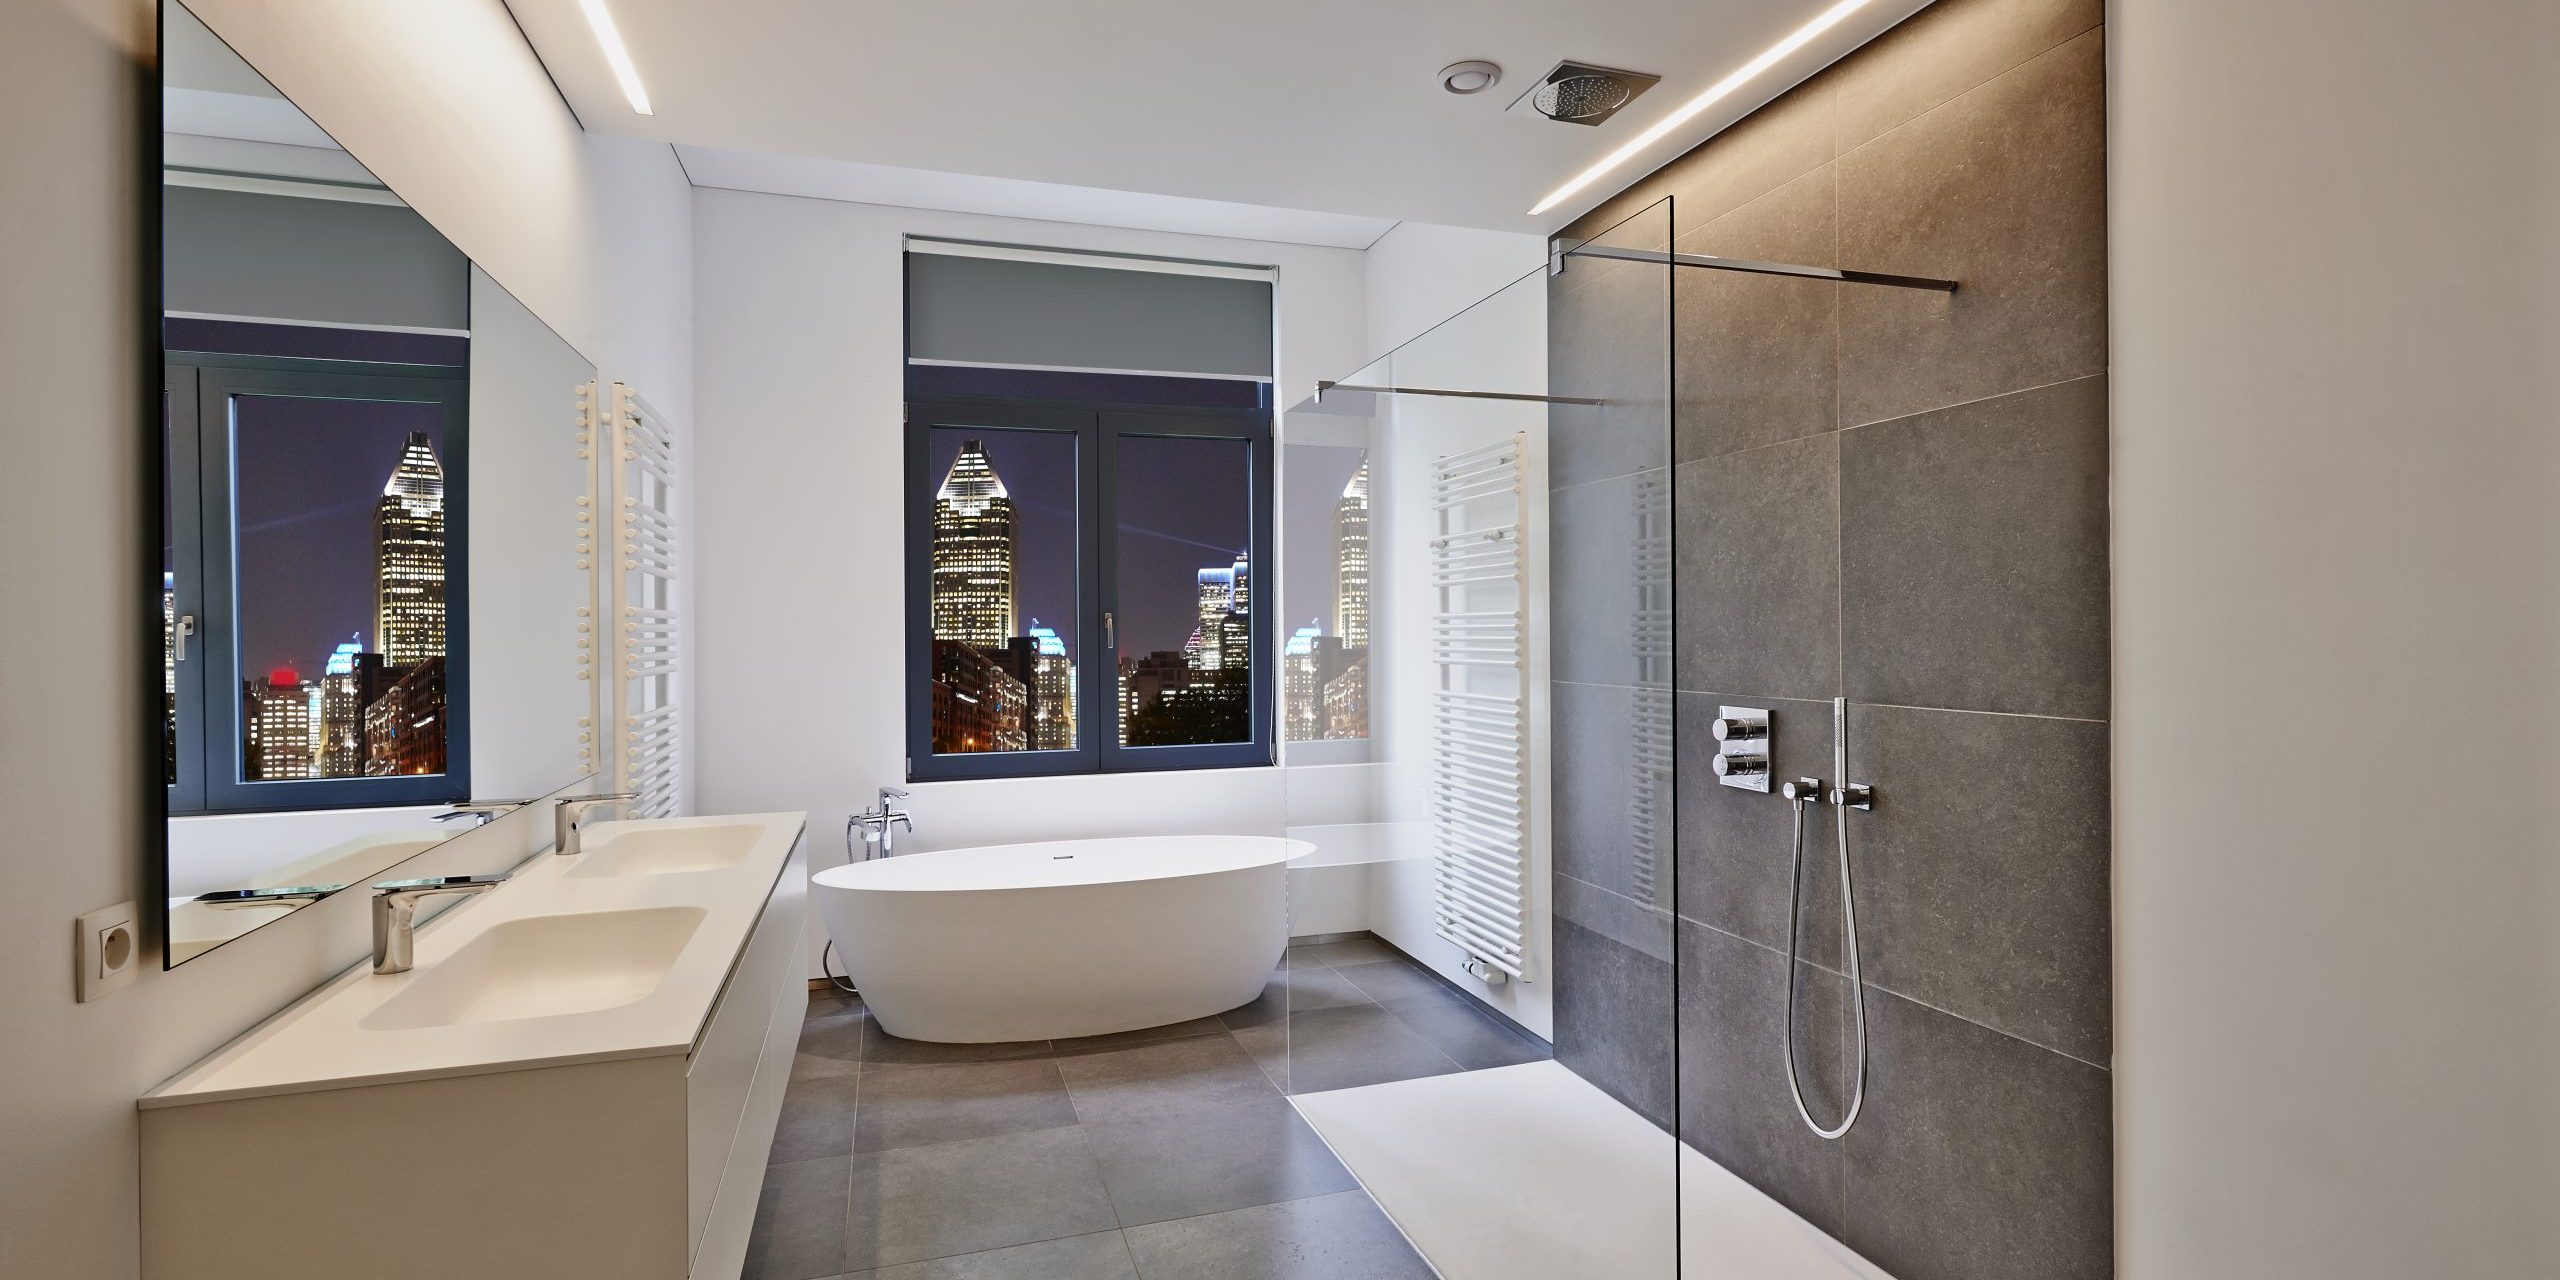 Bathtub in corian, Faucet and shower in tiled bathroom with windows towards night city lights